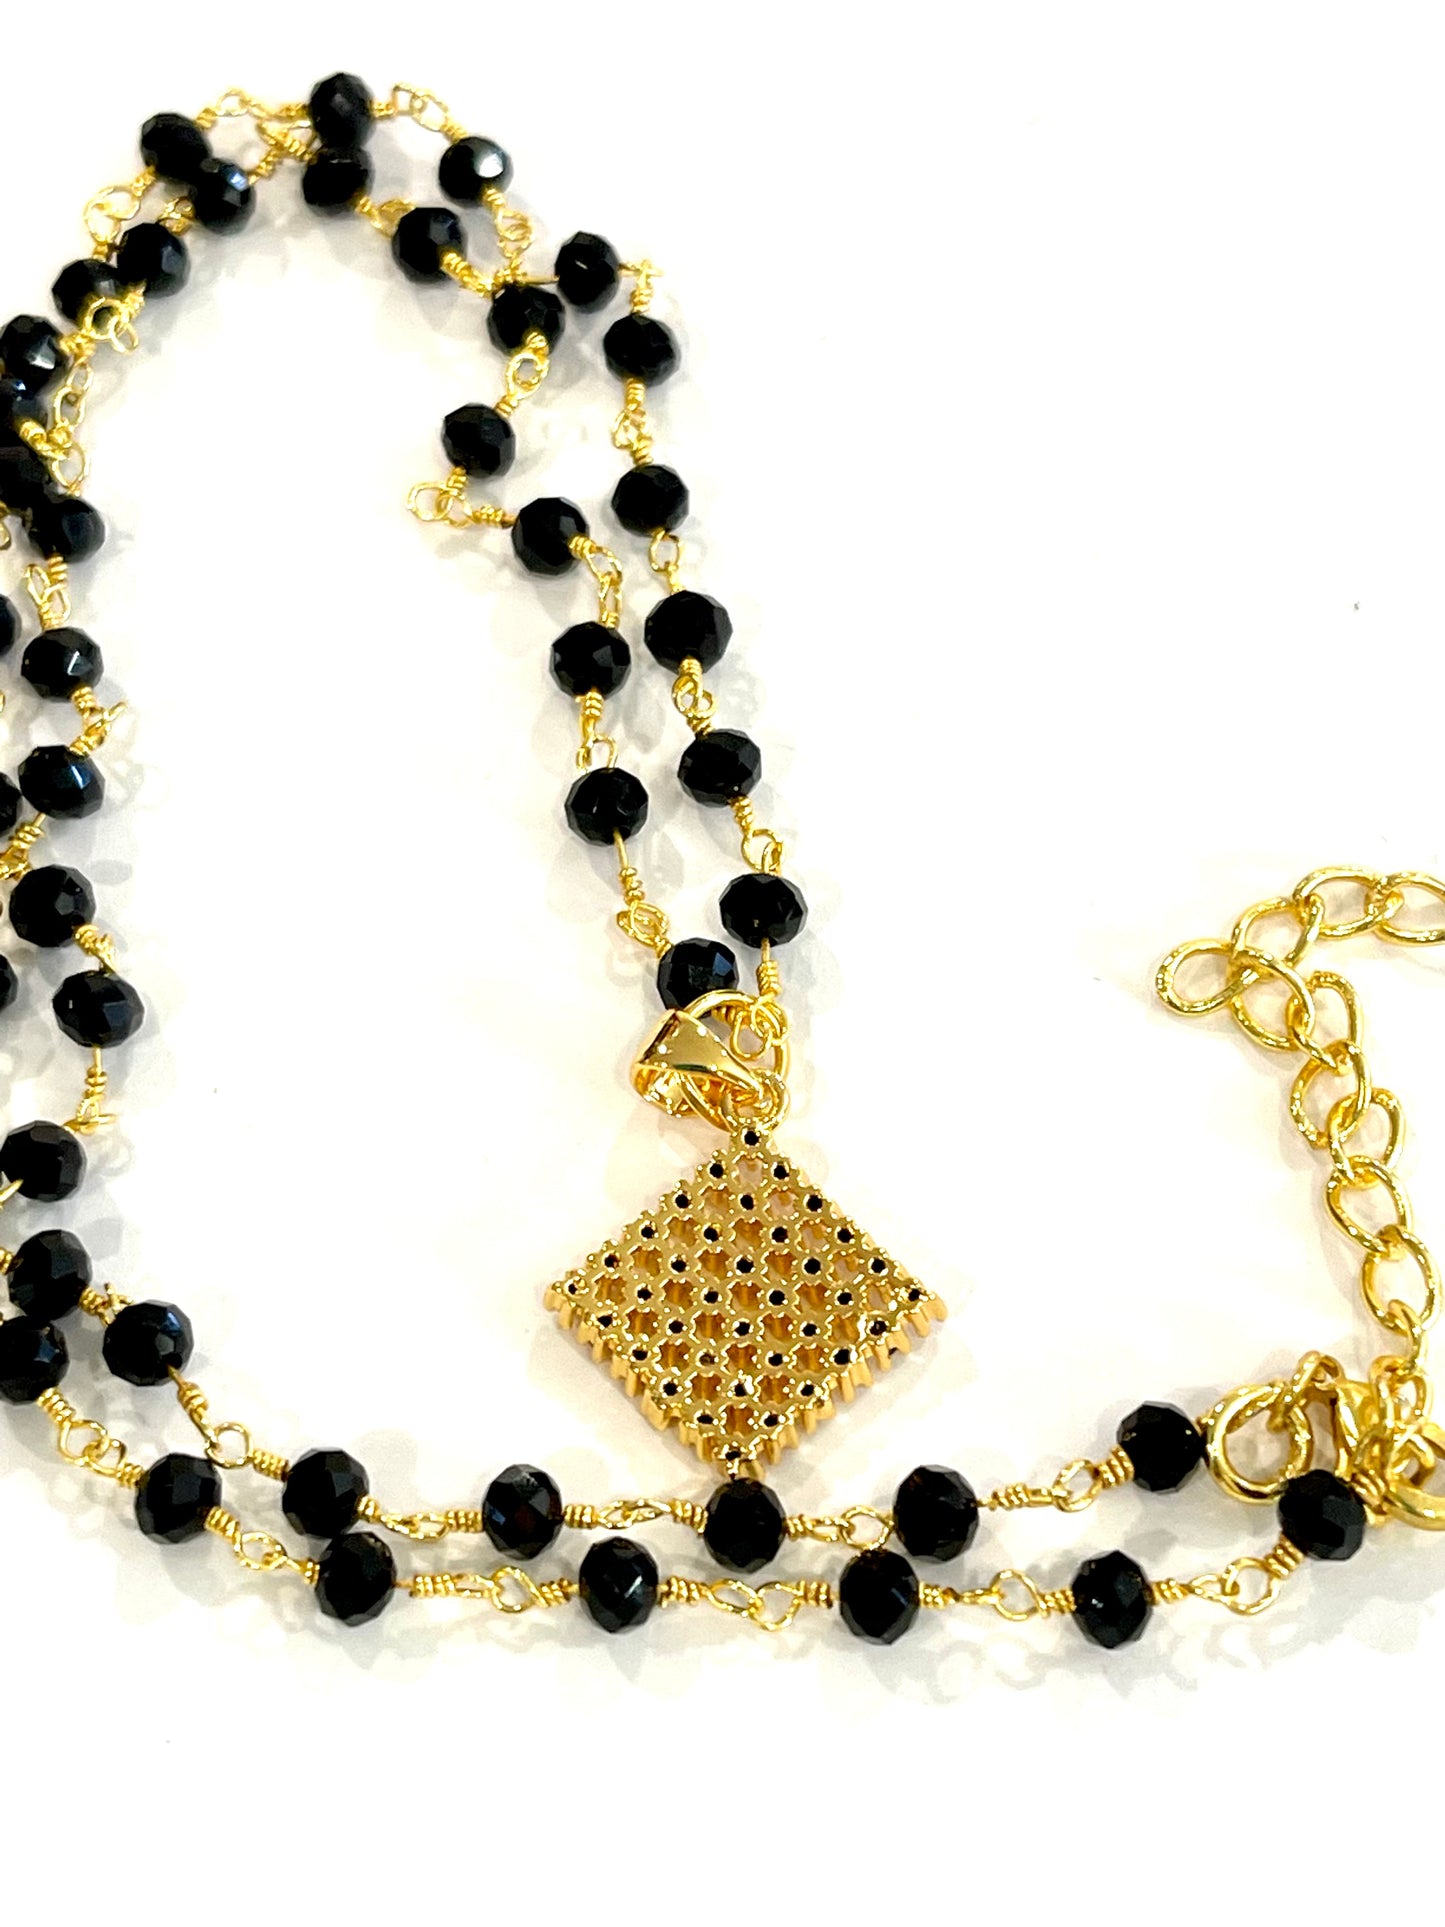 Dainty Black Onyx Gold Chain Necklace with Onyx Pendant 18"